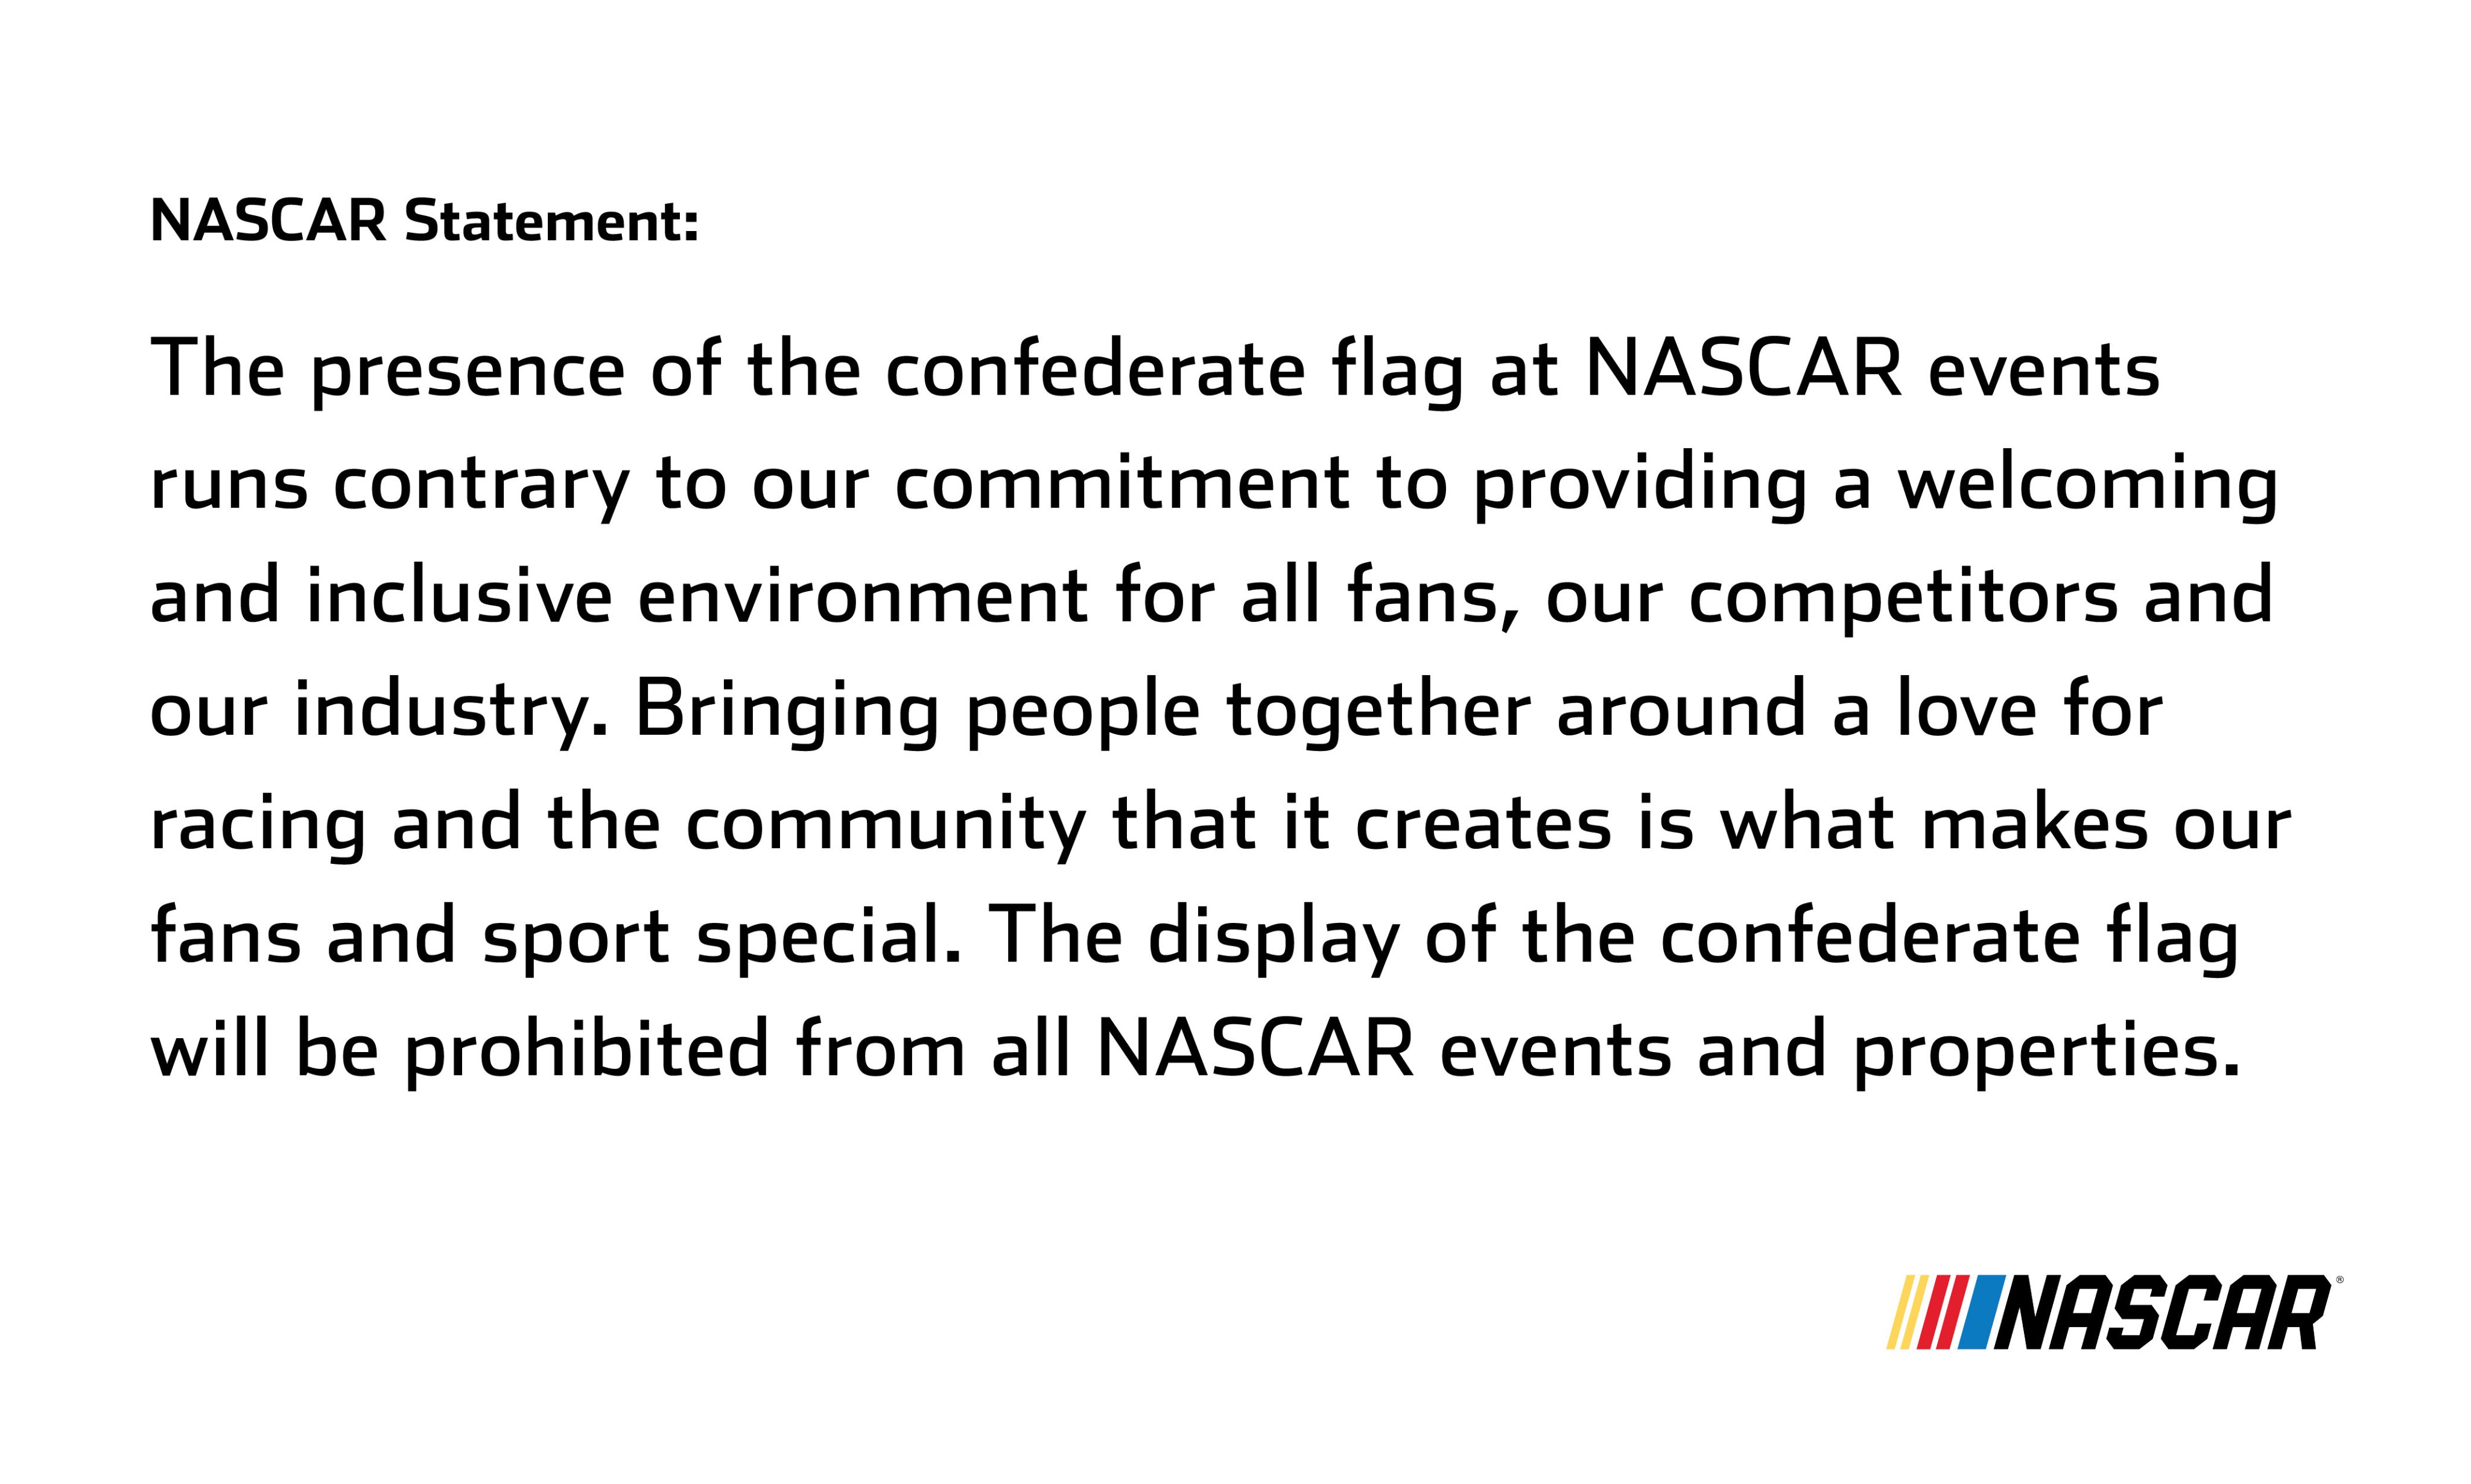 Nascar Statement The presence of the confederate flag at Nascar events runs contrary to our commitment to providing a welcoming and inclusive environment for all fans, our competitors and our industry. Bringing people together around a love for